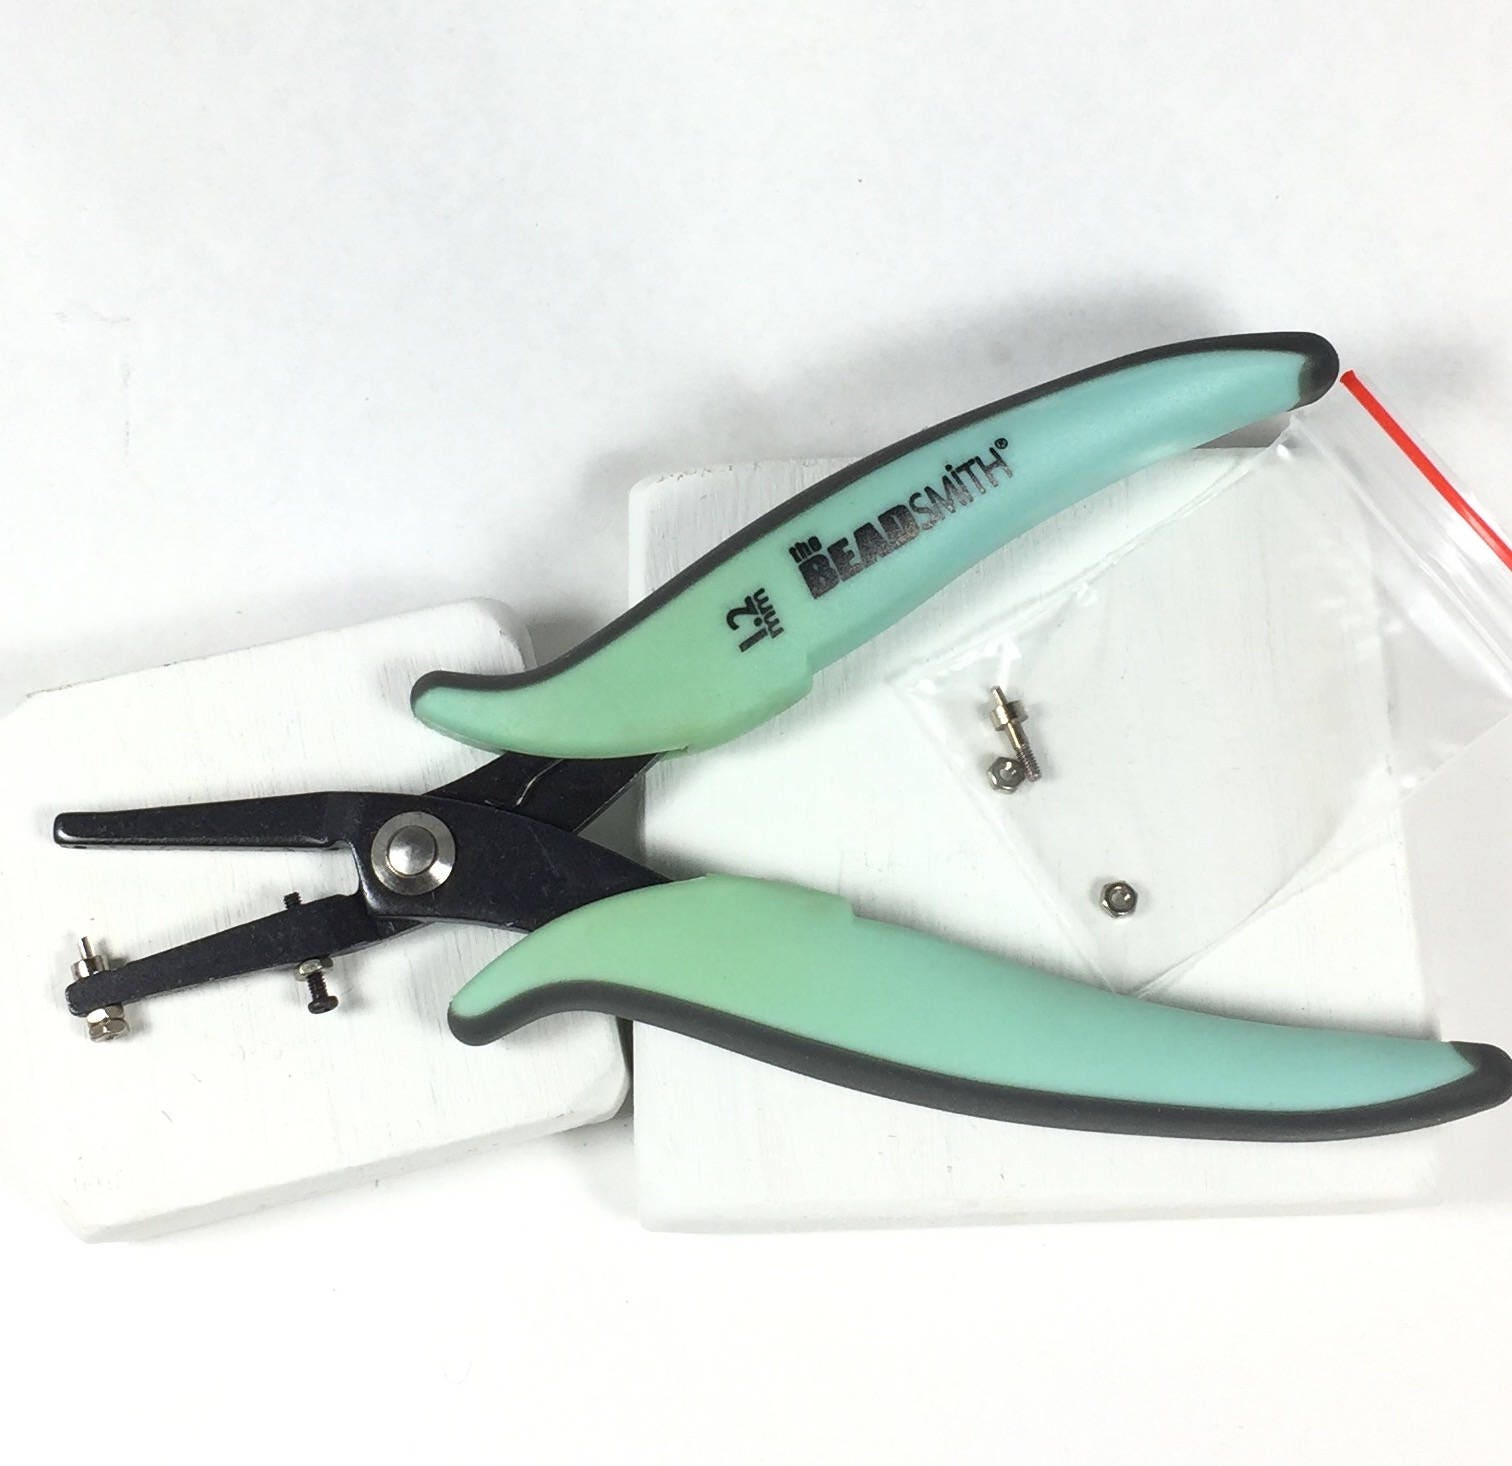 Small Rotating Hole Punch 0.8mm, 1 Mm, 1.2 Mm, 1.5 Mm, and 2 Mm Holes  Leather Rotary Hole Punch 